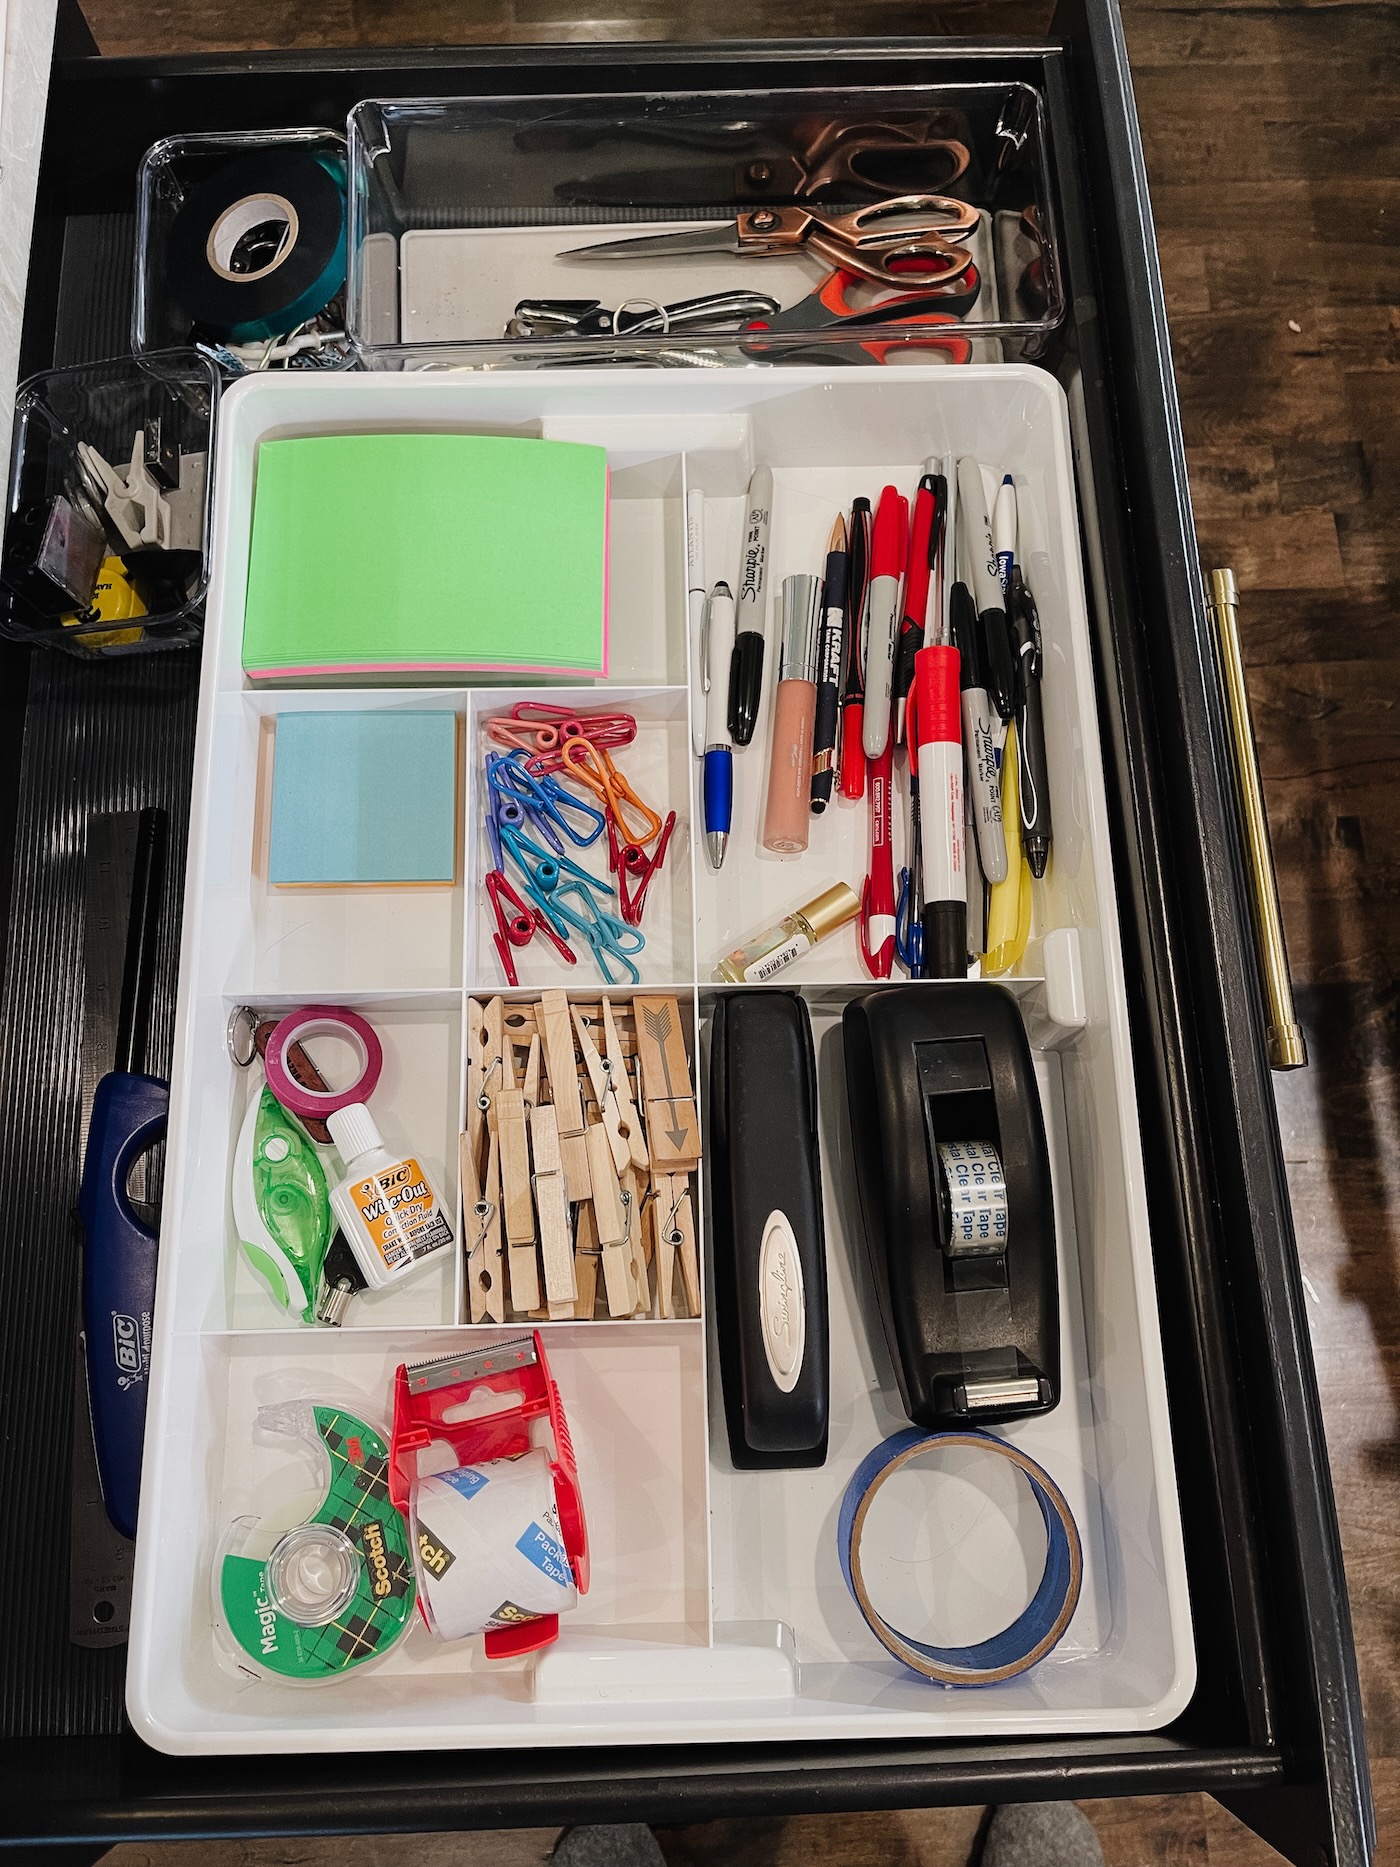 How to Organize the Inside of Kitchen Cabinets - Life Love Larson